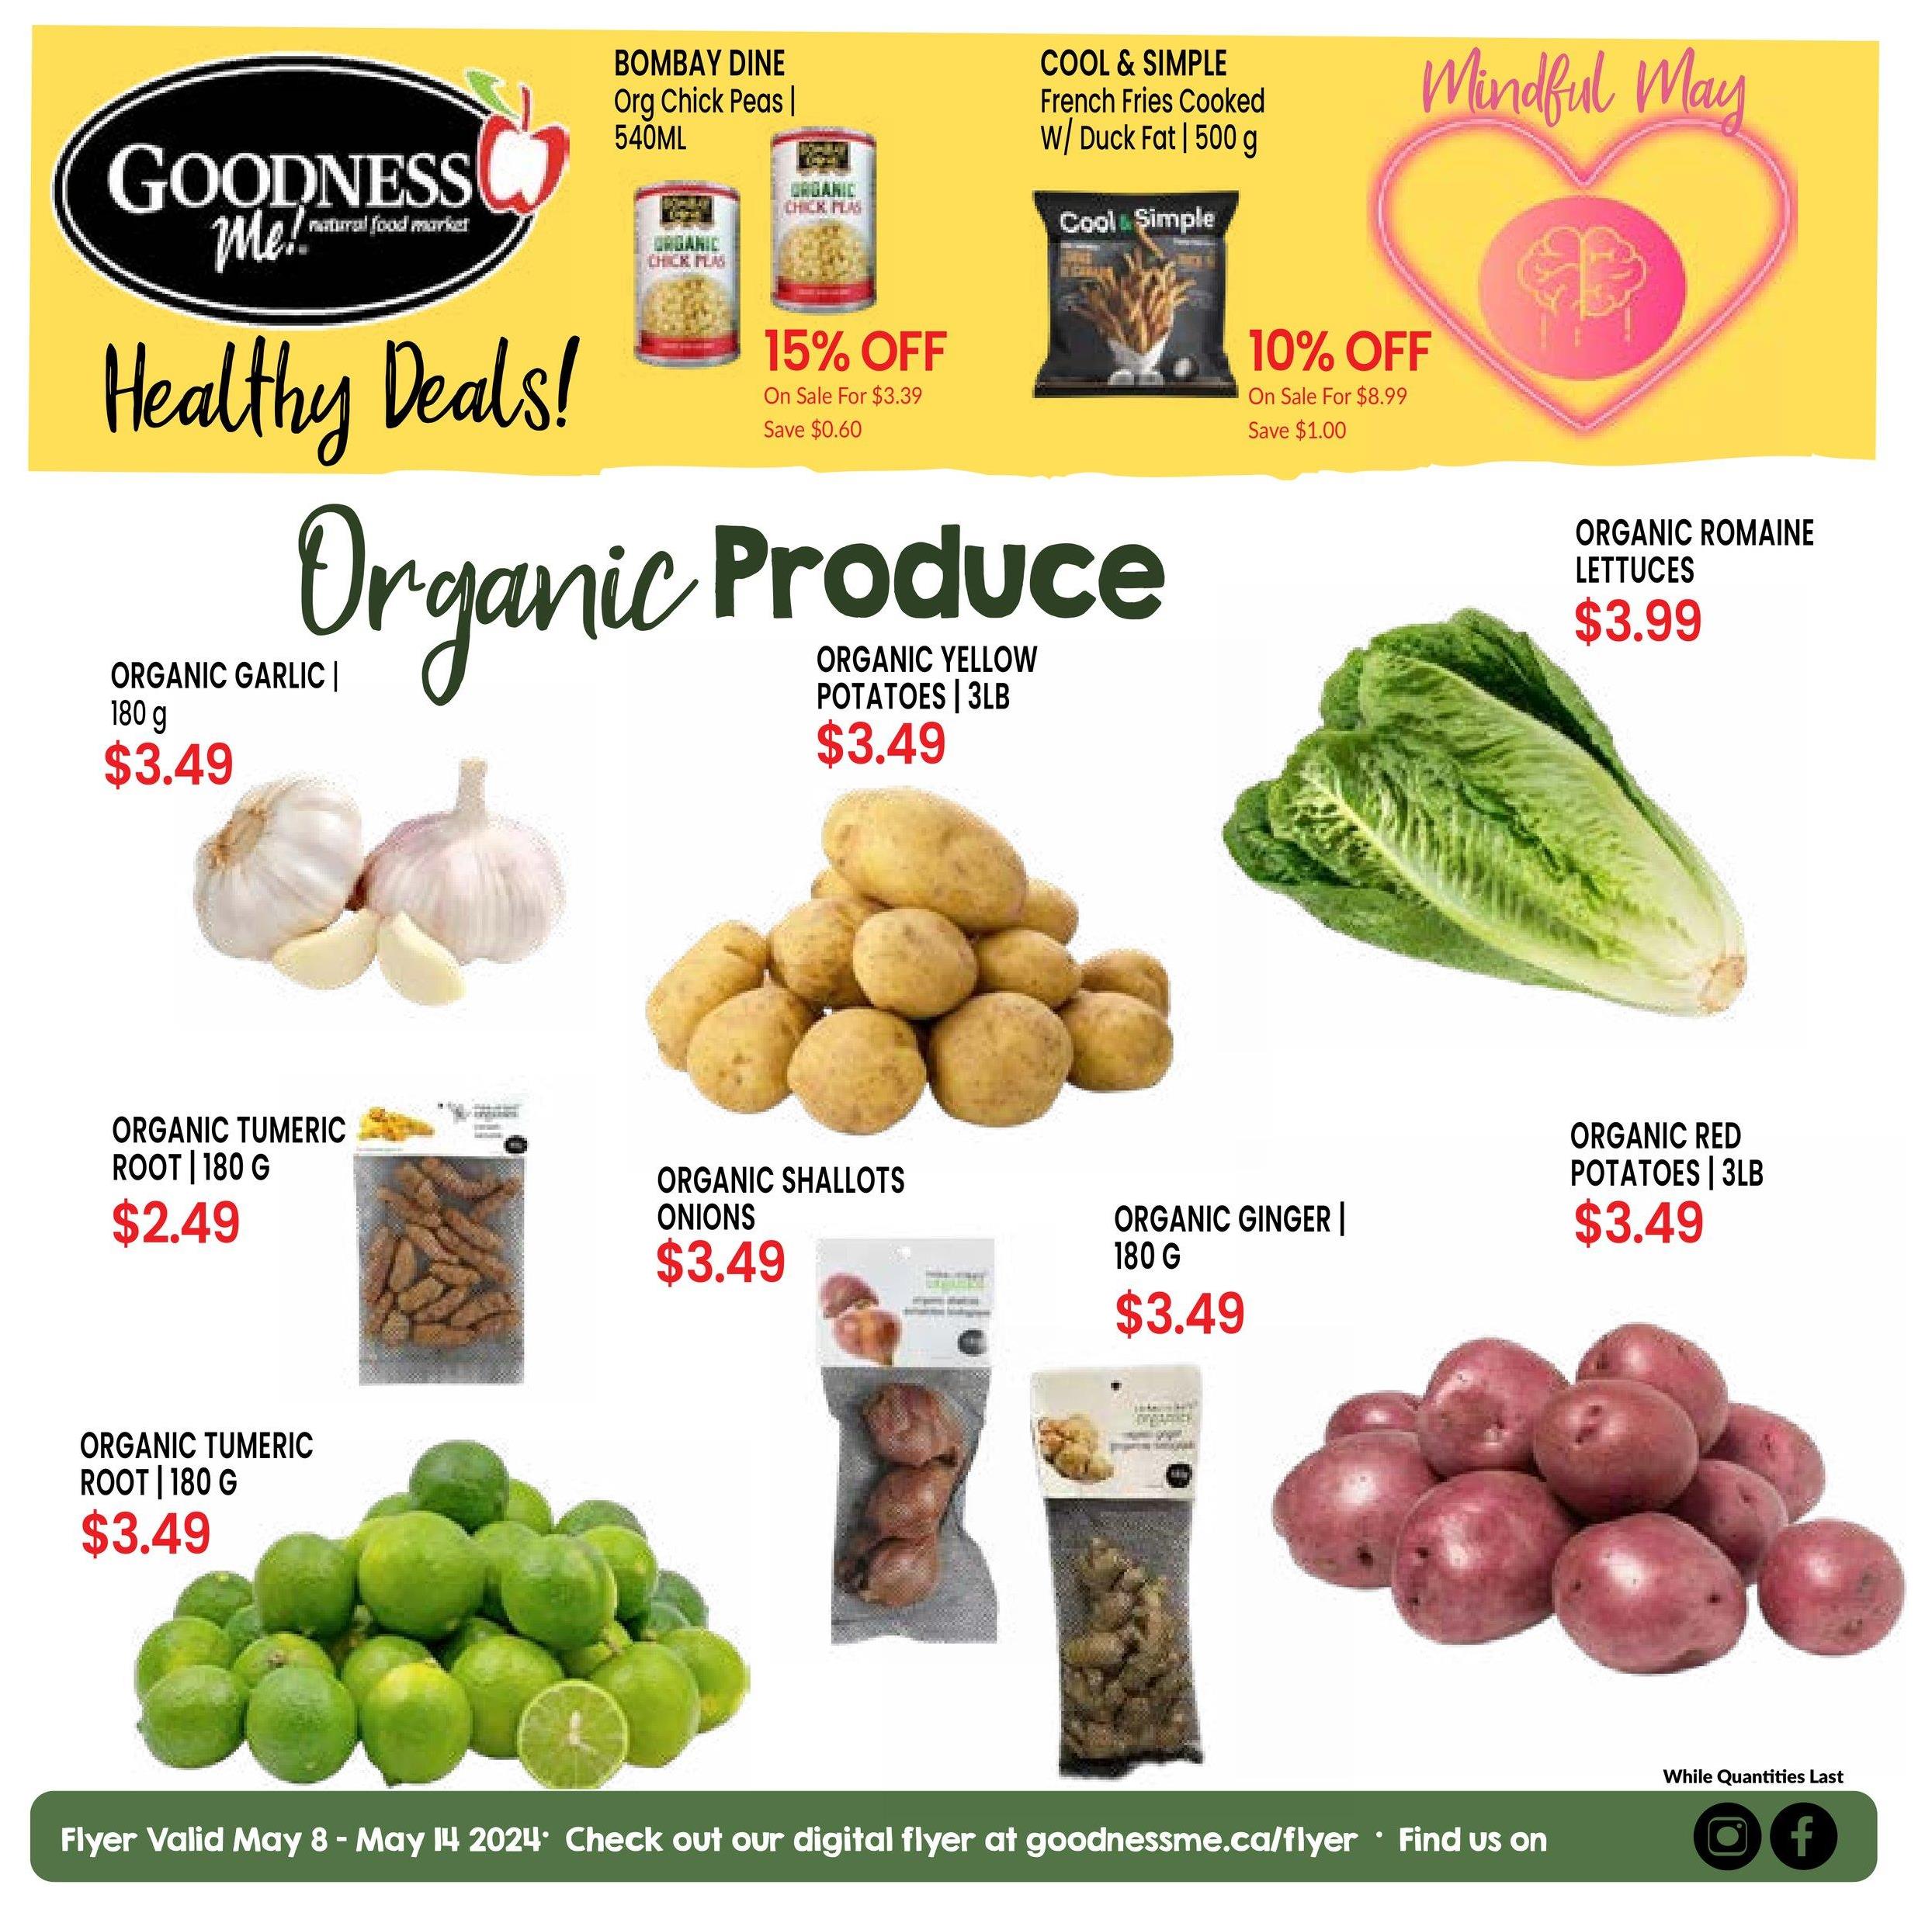 Goodness Me! - Weekly Flyer Specials